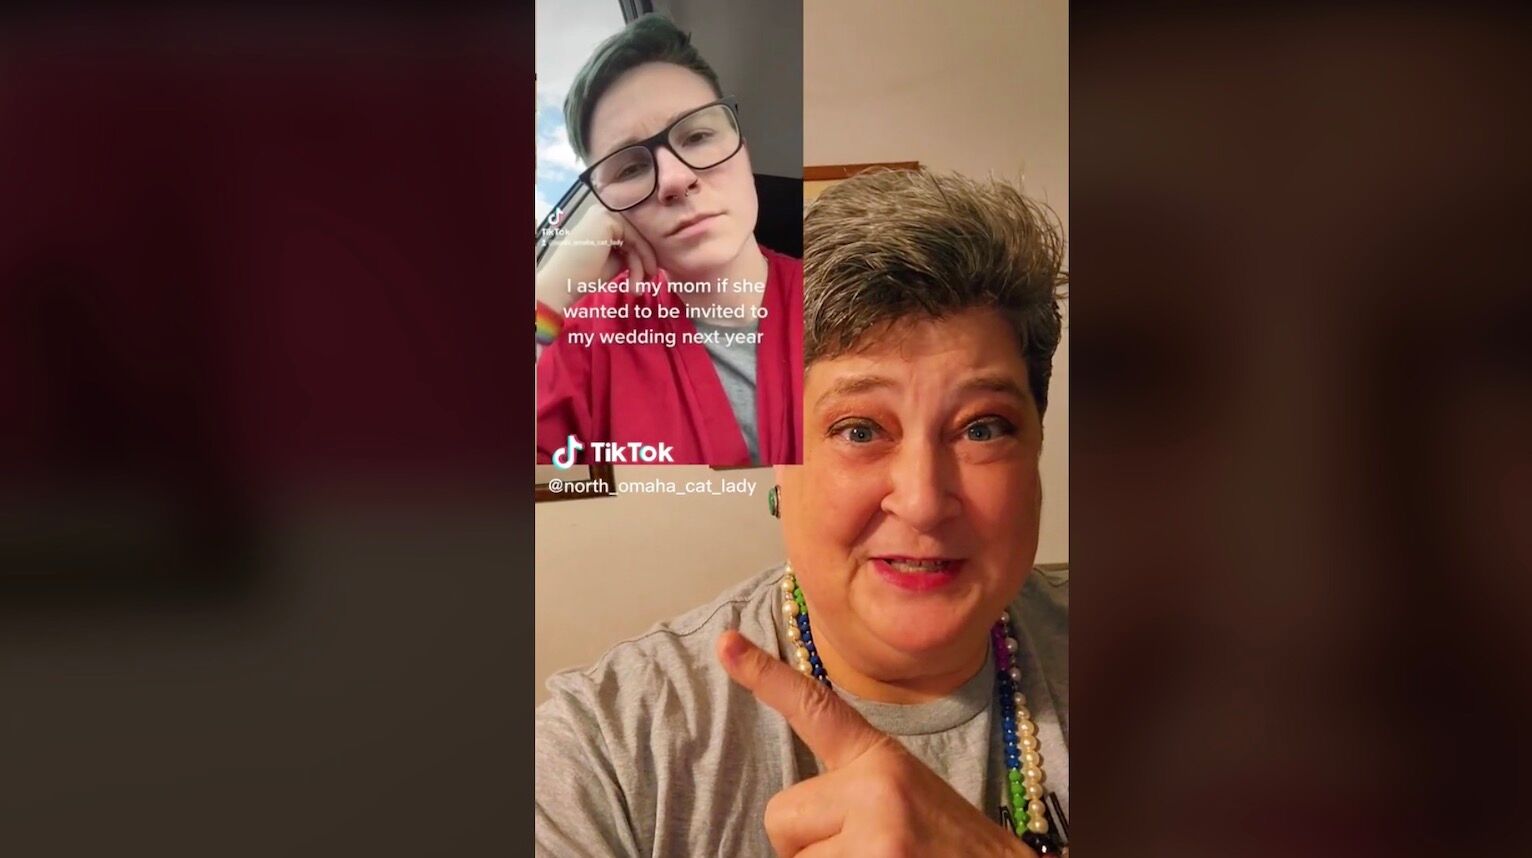 TikTok brought together a stand-in mom and nonbinary groom whose mom rejected him